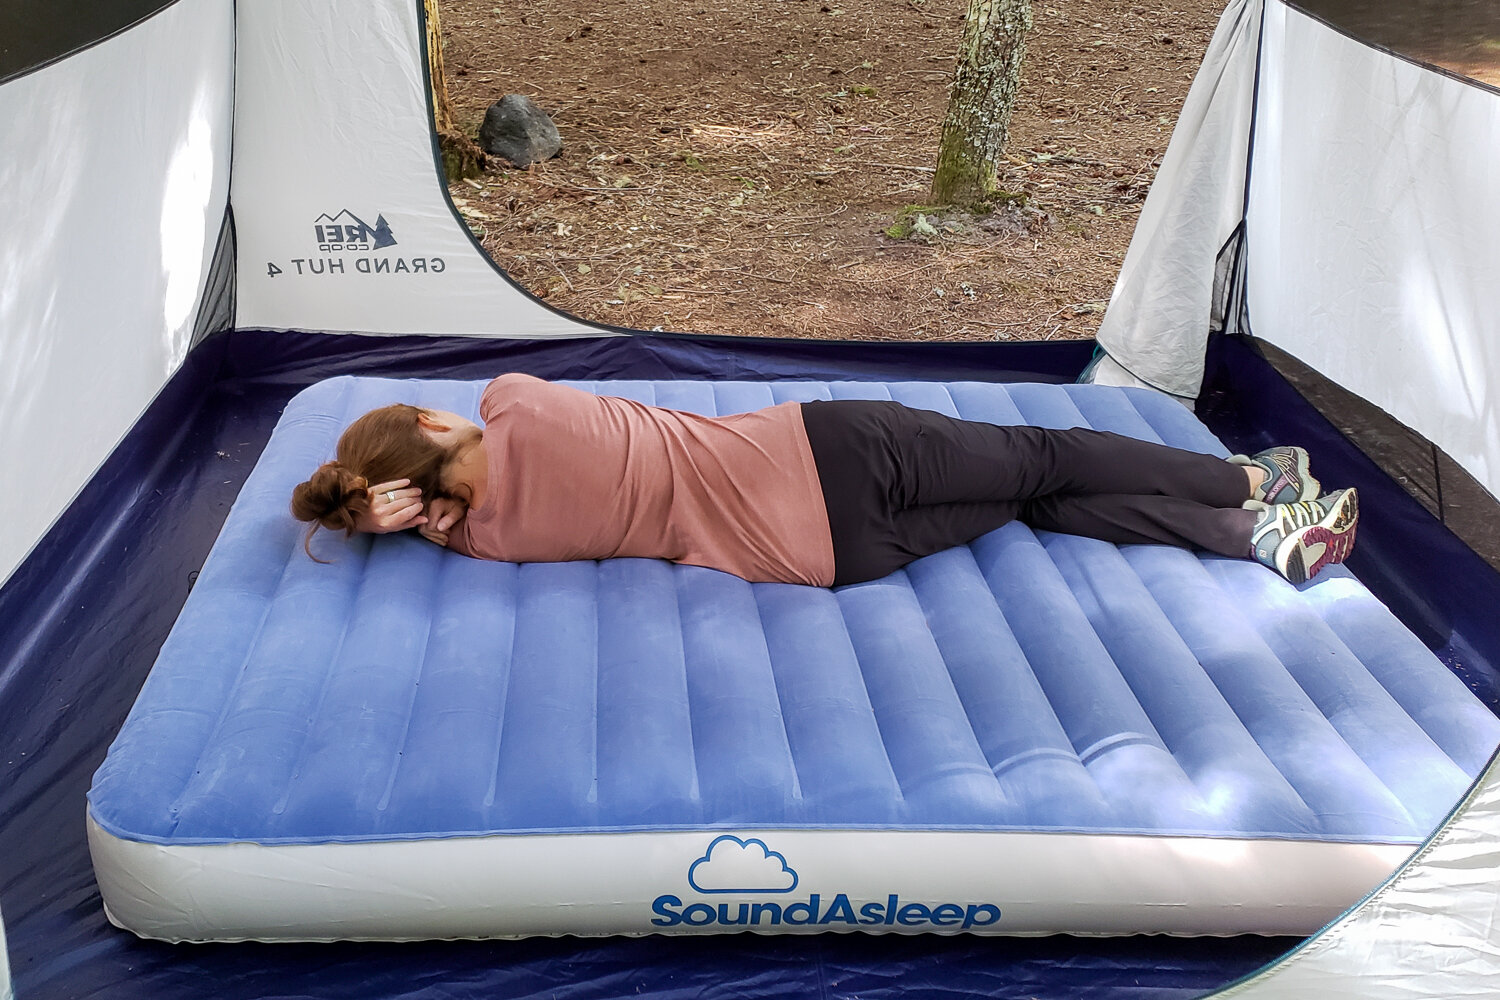 The SoundAsleep Camping Series Air Mattress is a convenient and affordable option for couples and families